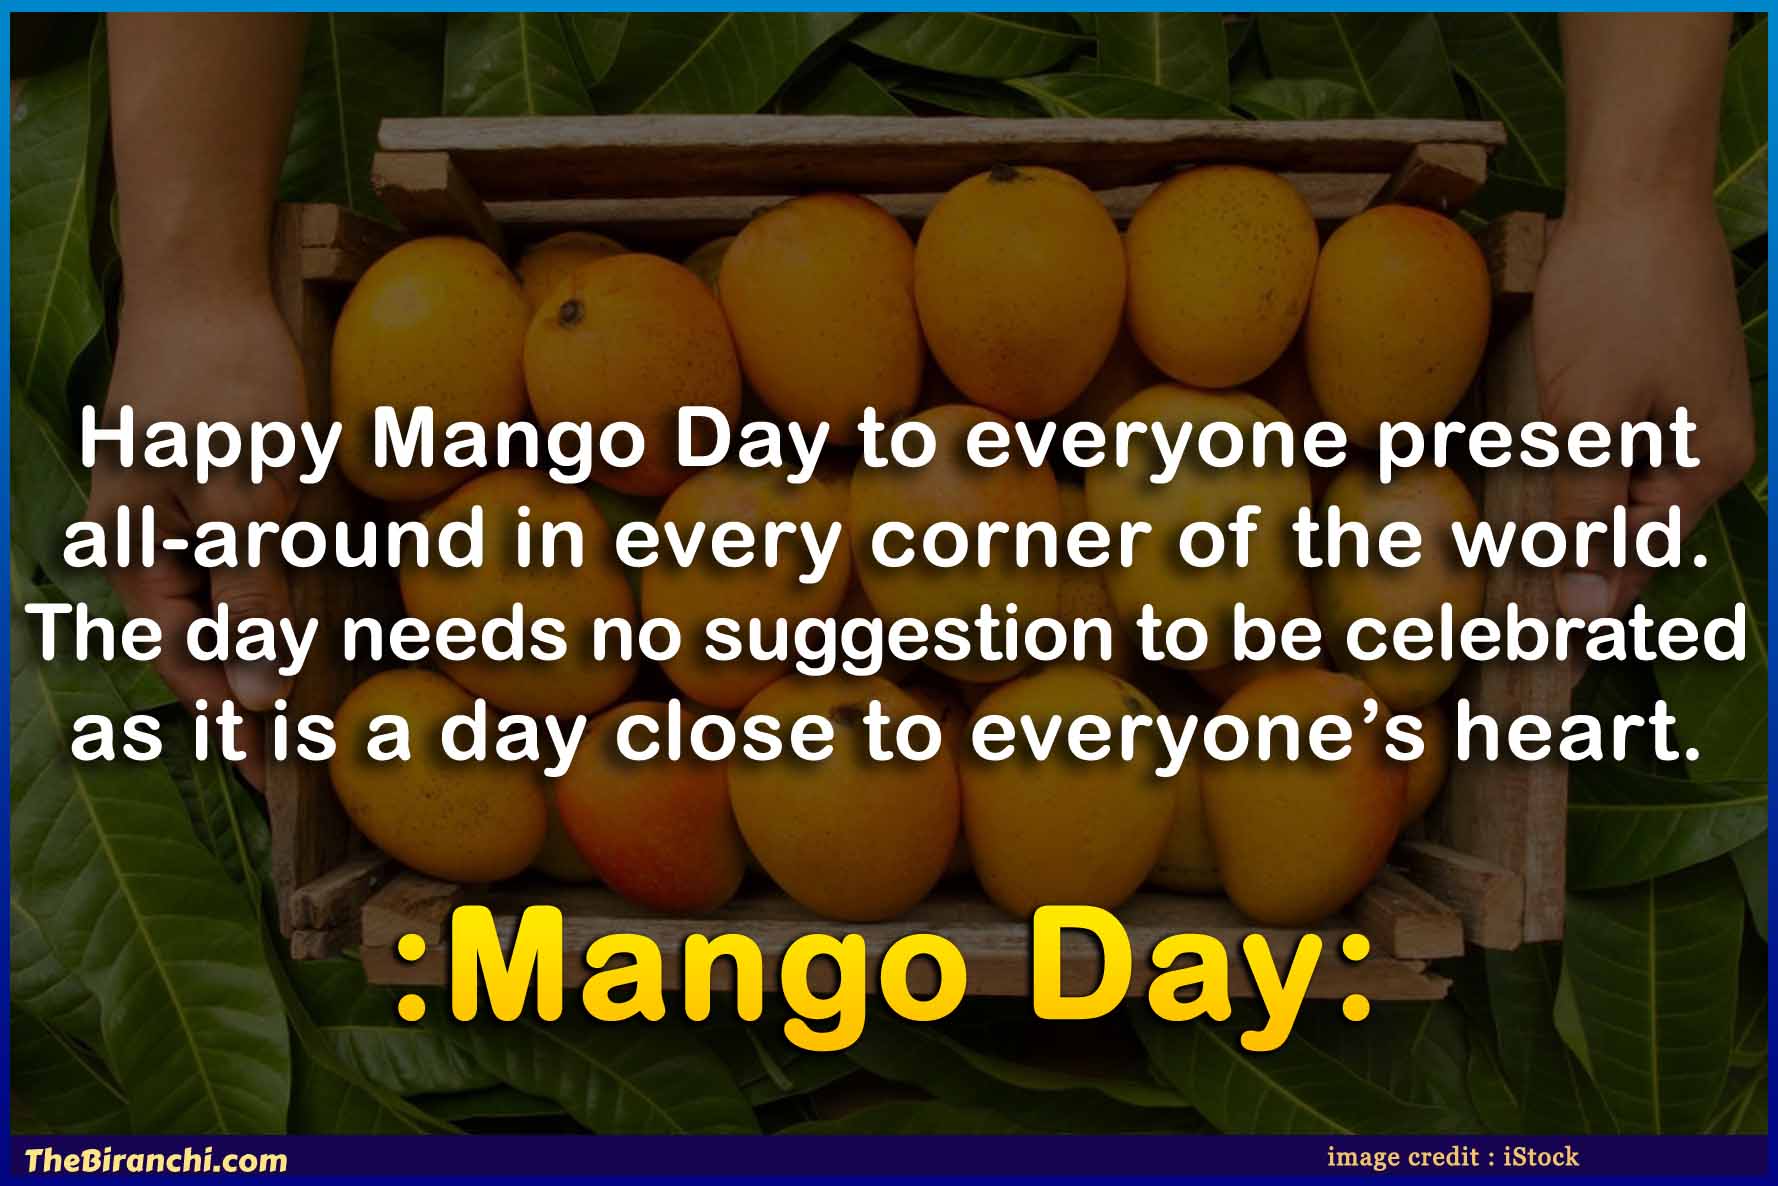 Happy-Mango-Day-to-everyone-Mango-Day-Quotes-Wishes-Greetings-Messages